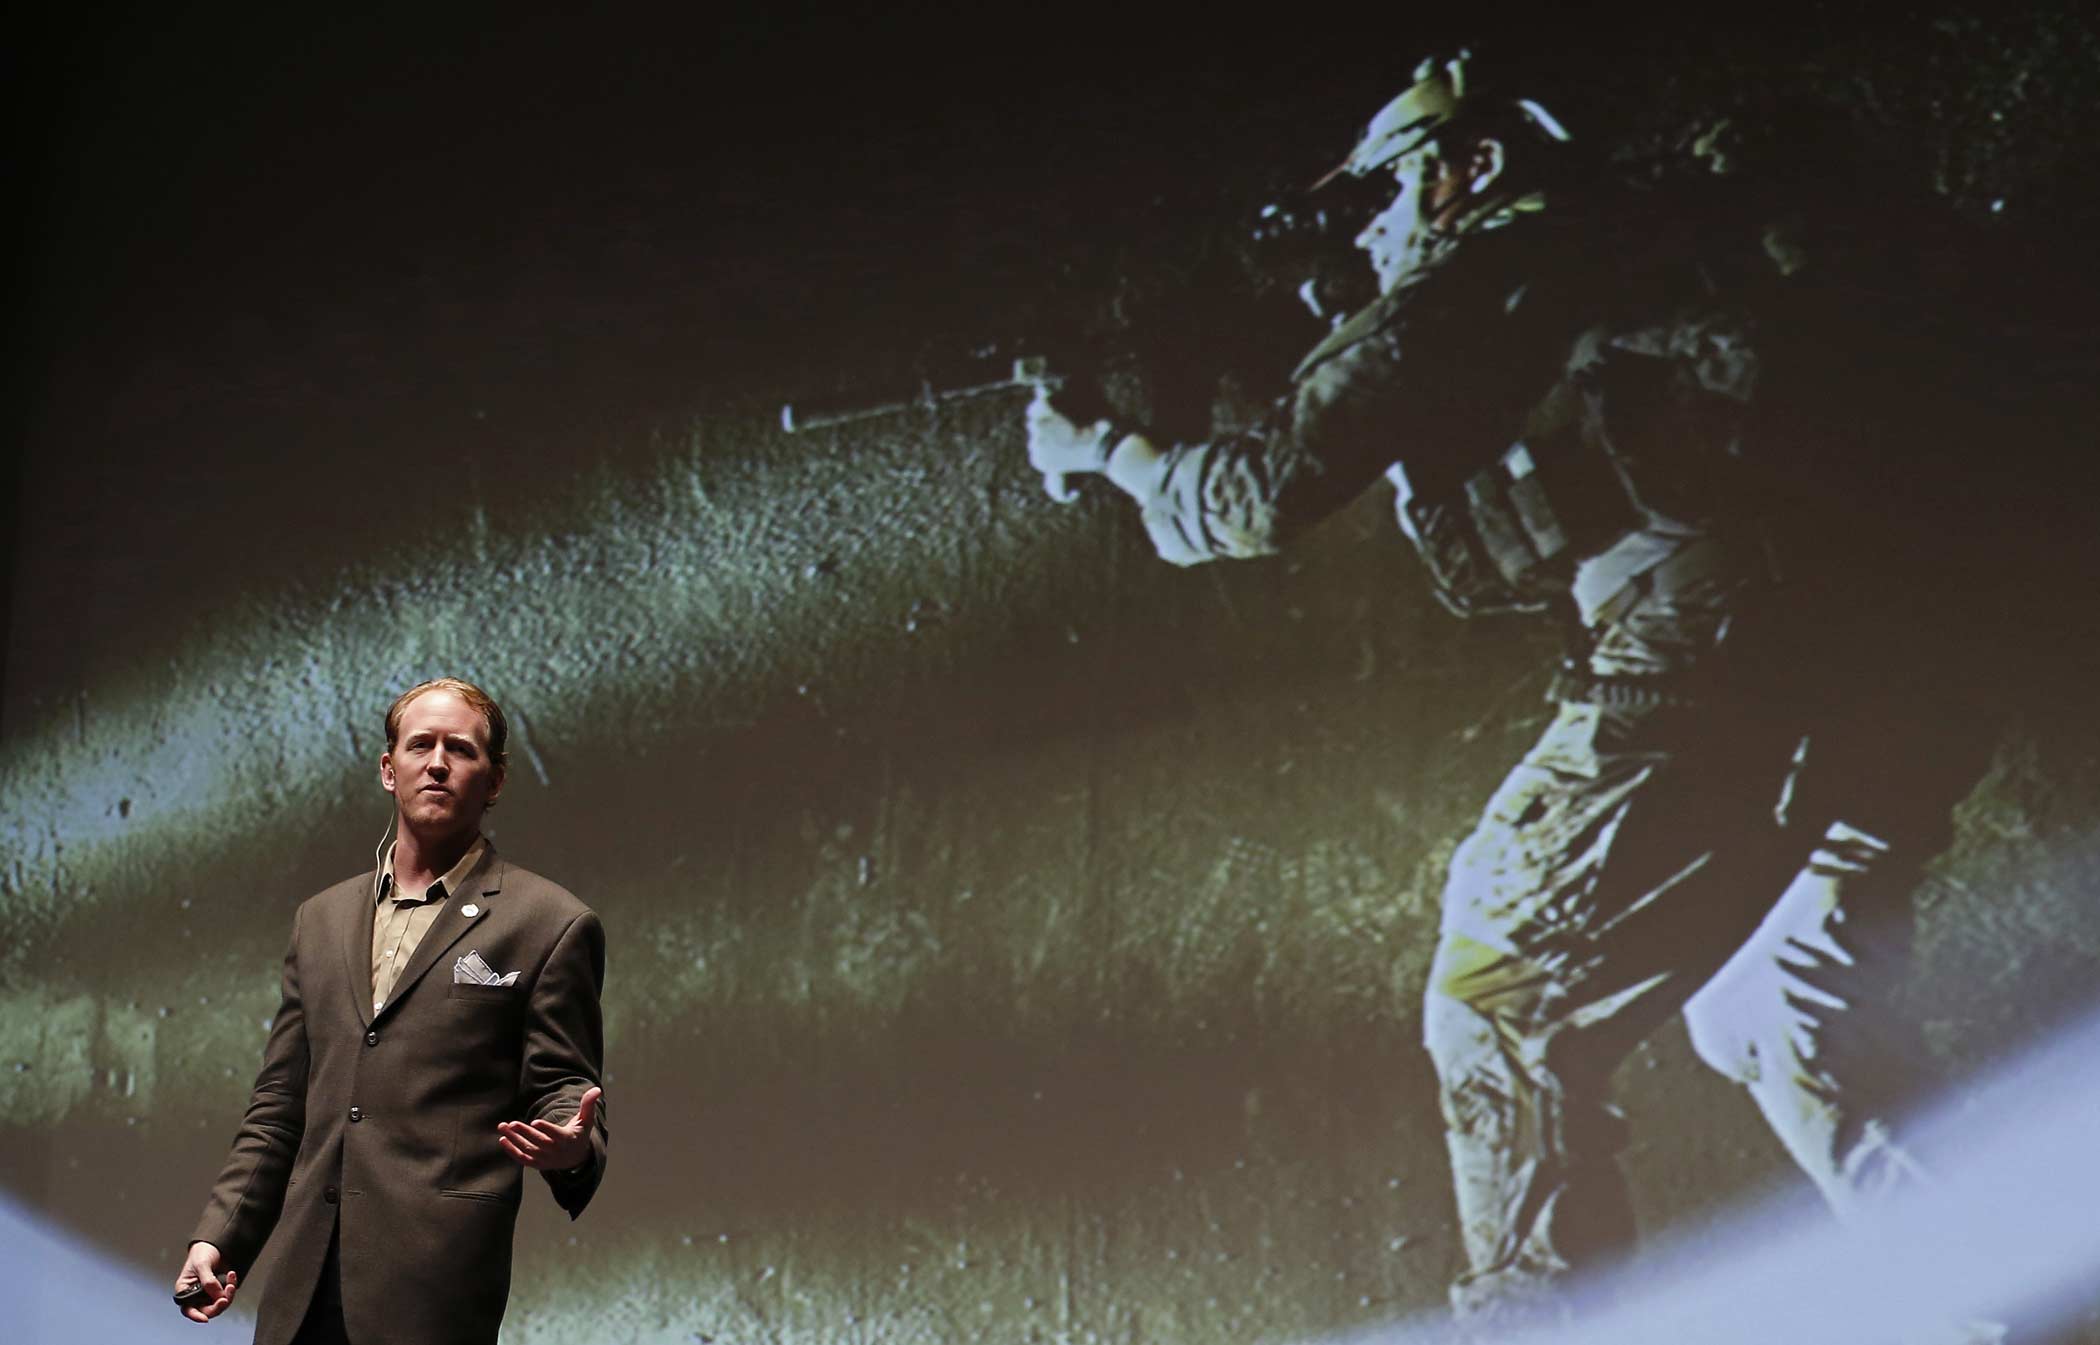 Robert O'Neill, a former U.S. Navy SEAL, speaks at the "Best of Blount" Chamber of Commerce awards ceremony at the Clayton Center for the Arts in Maryville, Tennessee, U.S., on Thursday, Nov. 6. (Luke Sharrett—Bloomberg/Getty Images)